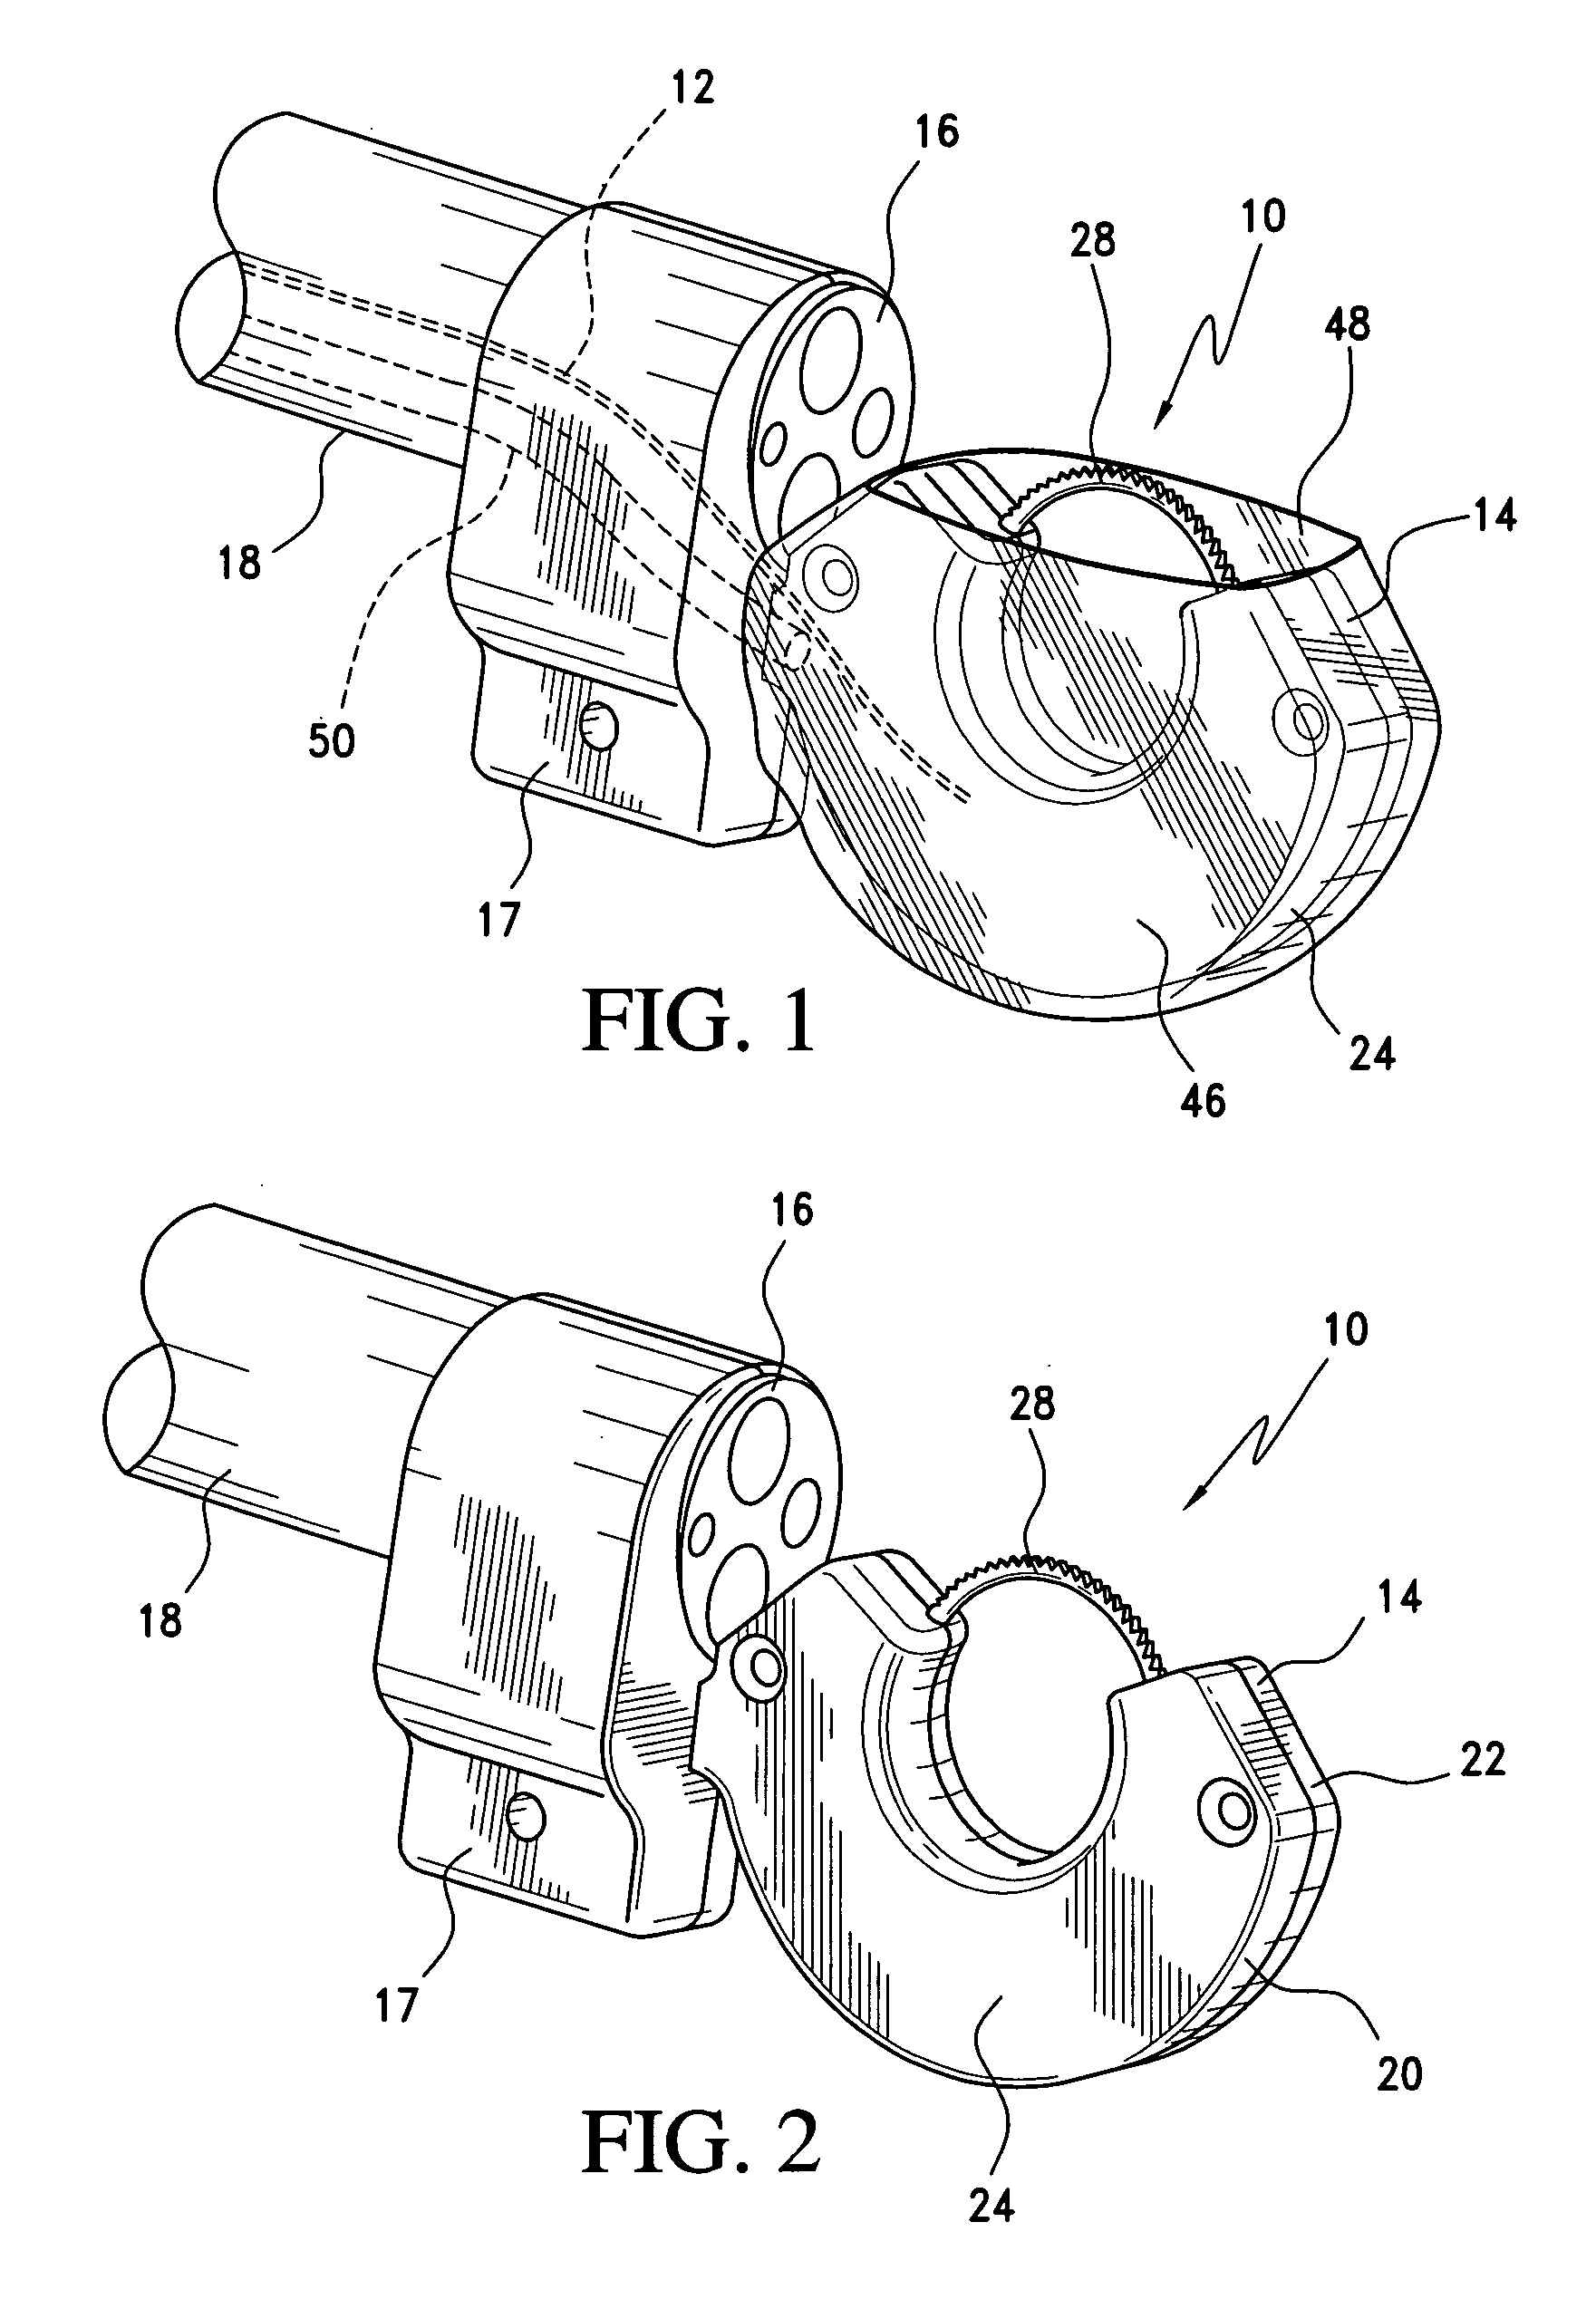 Surgical suturing apparatus with collapsible vacuum chamber